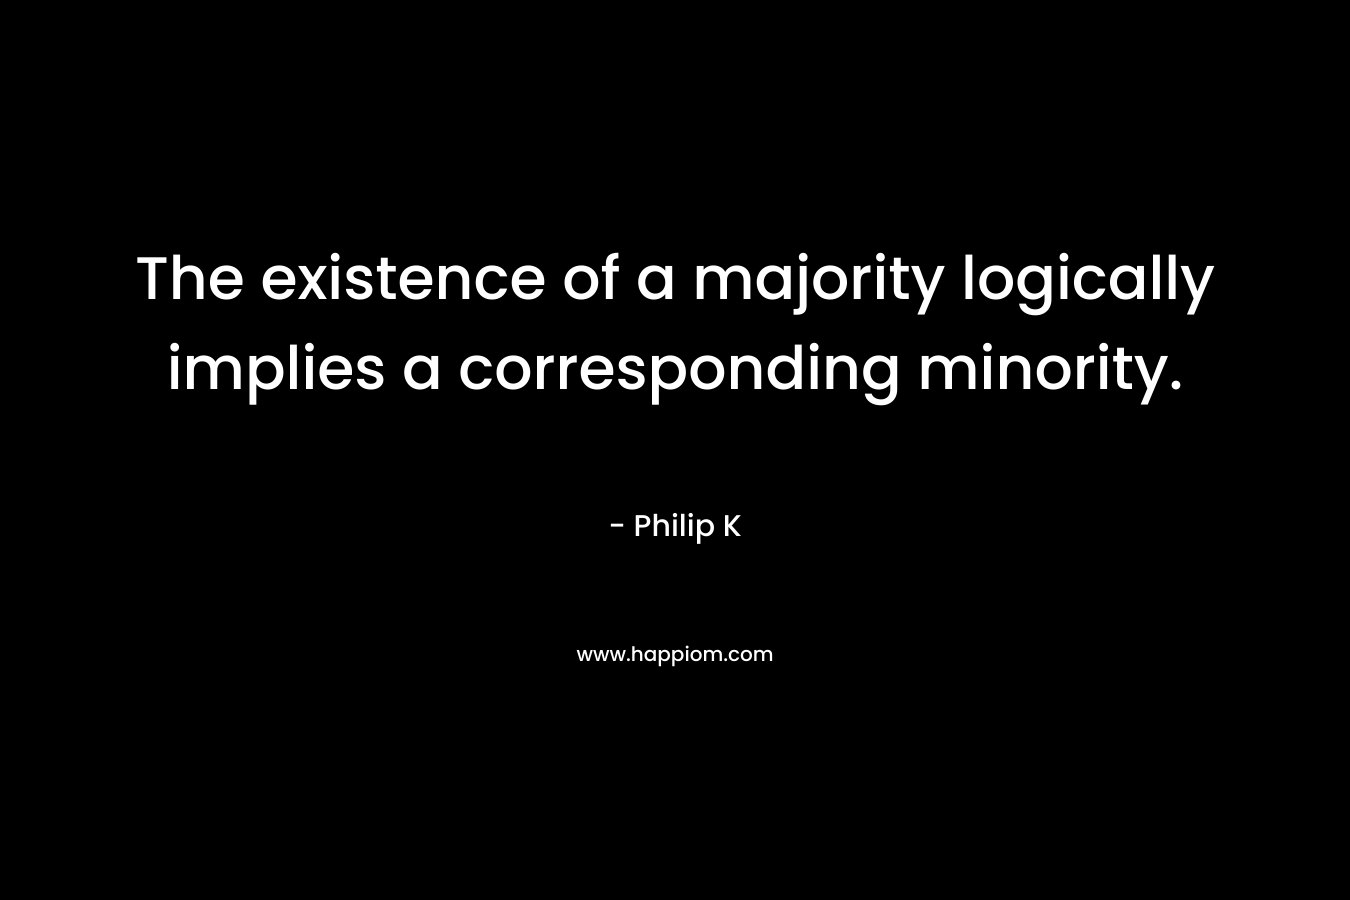 The existence of a majority logically implies a corresponding minority. – Philip K